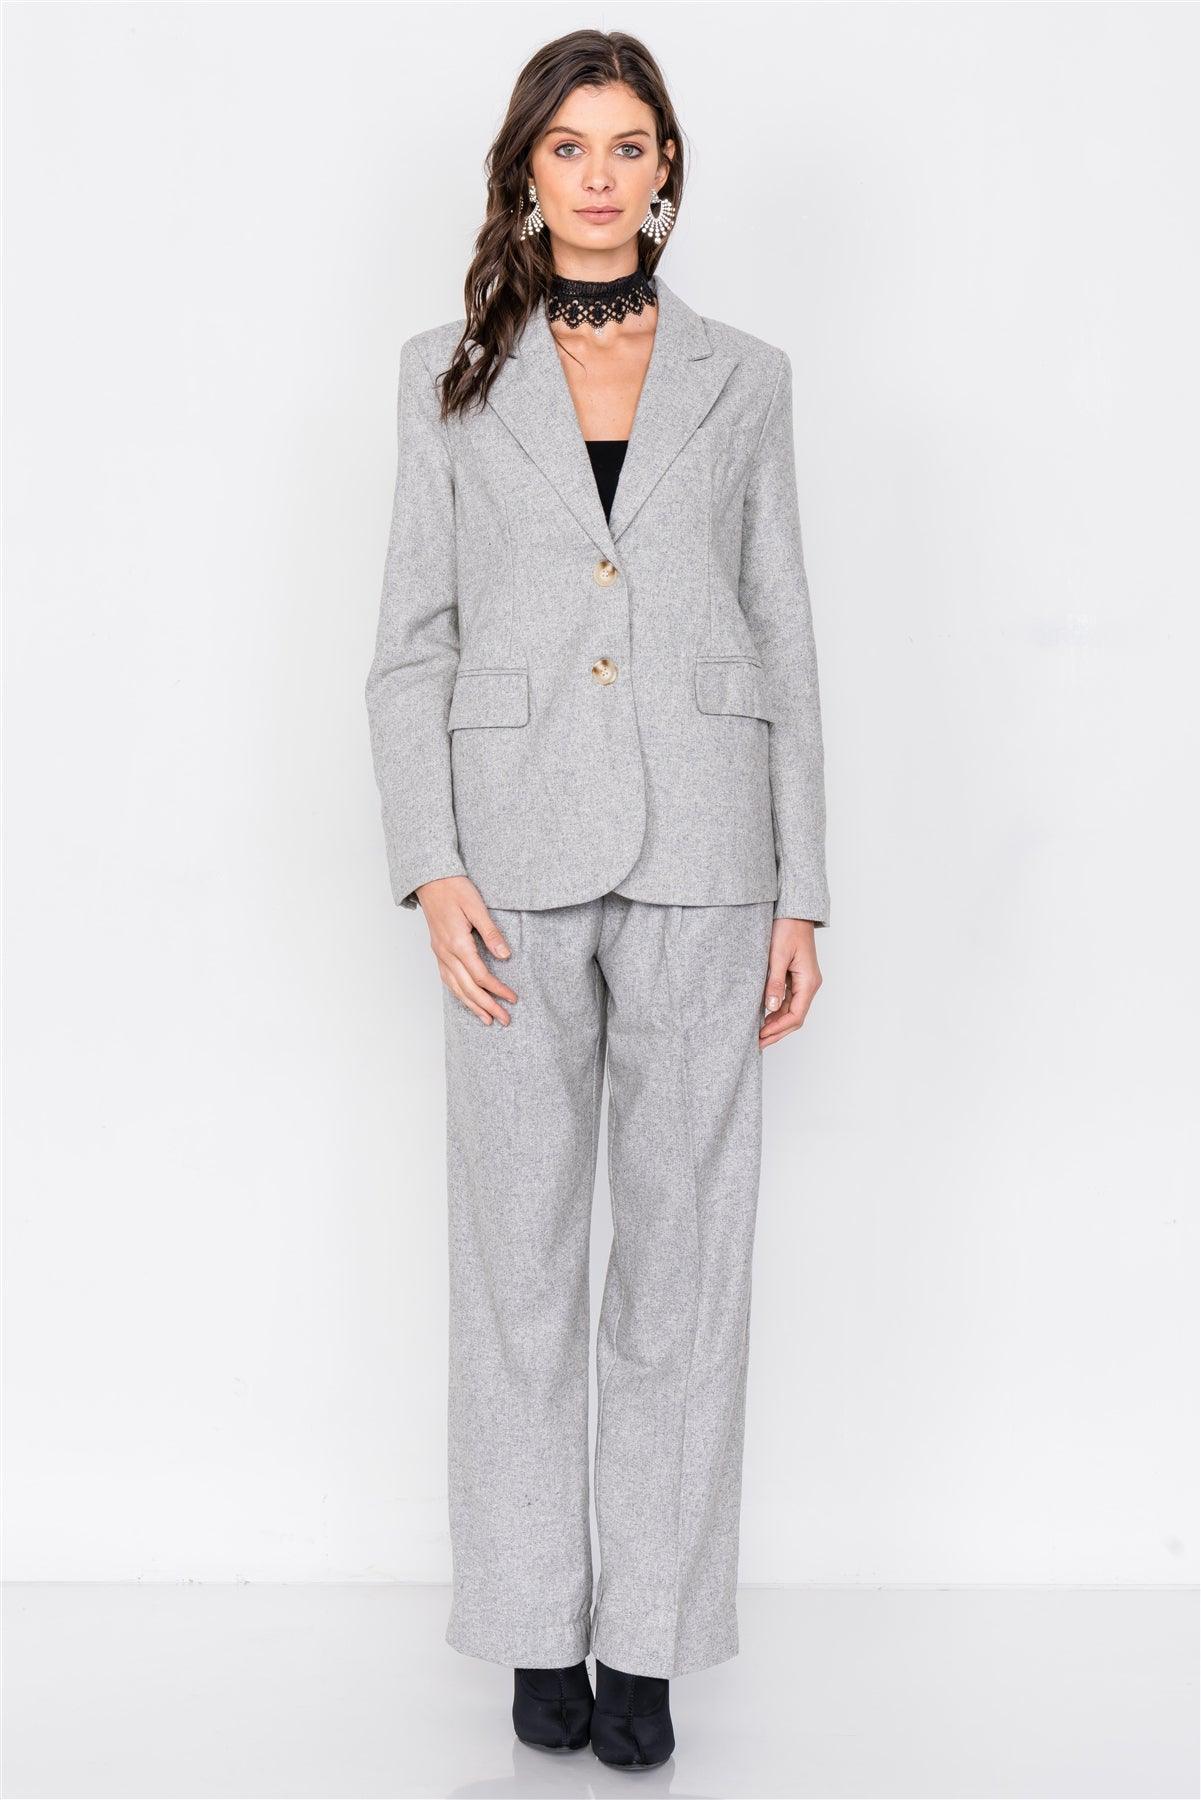 Grey Wool Blazer Office Chic Pleated High-Waist Ankle Pant Set /3-2-1